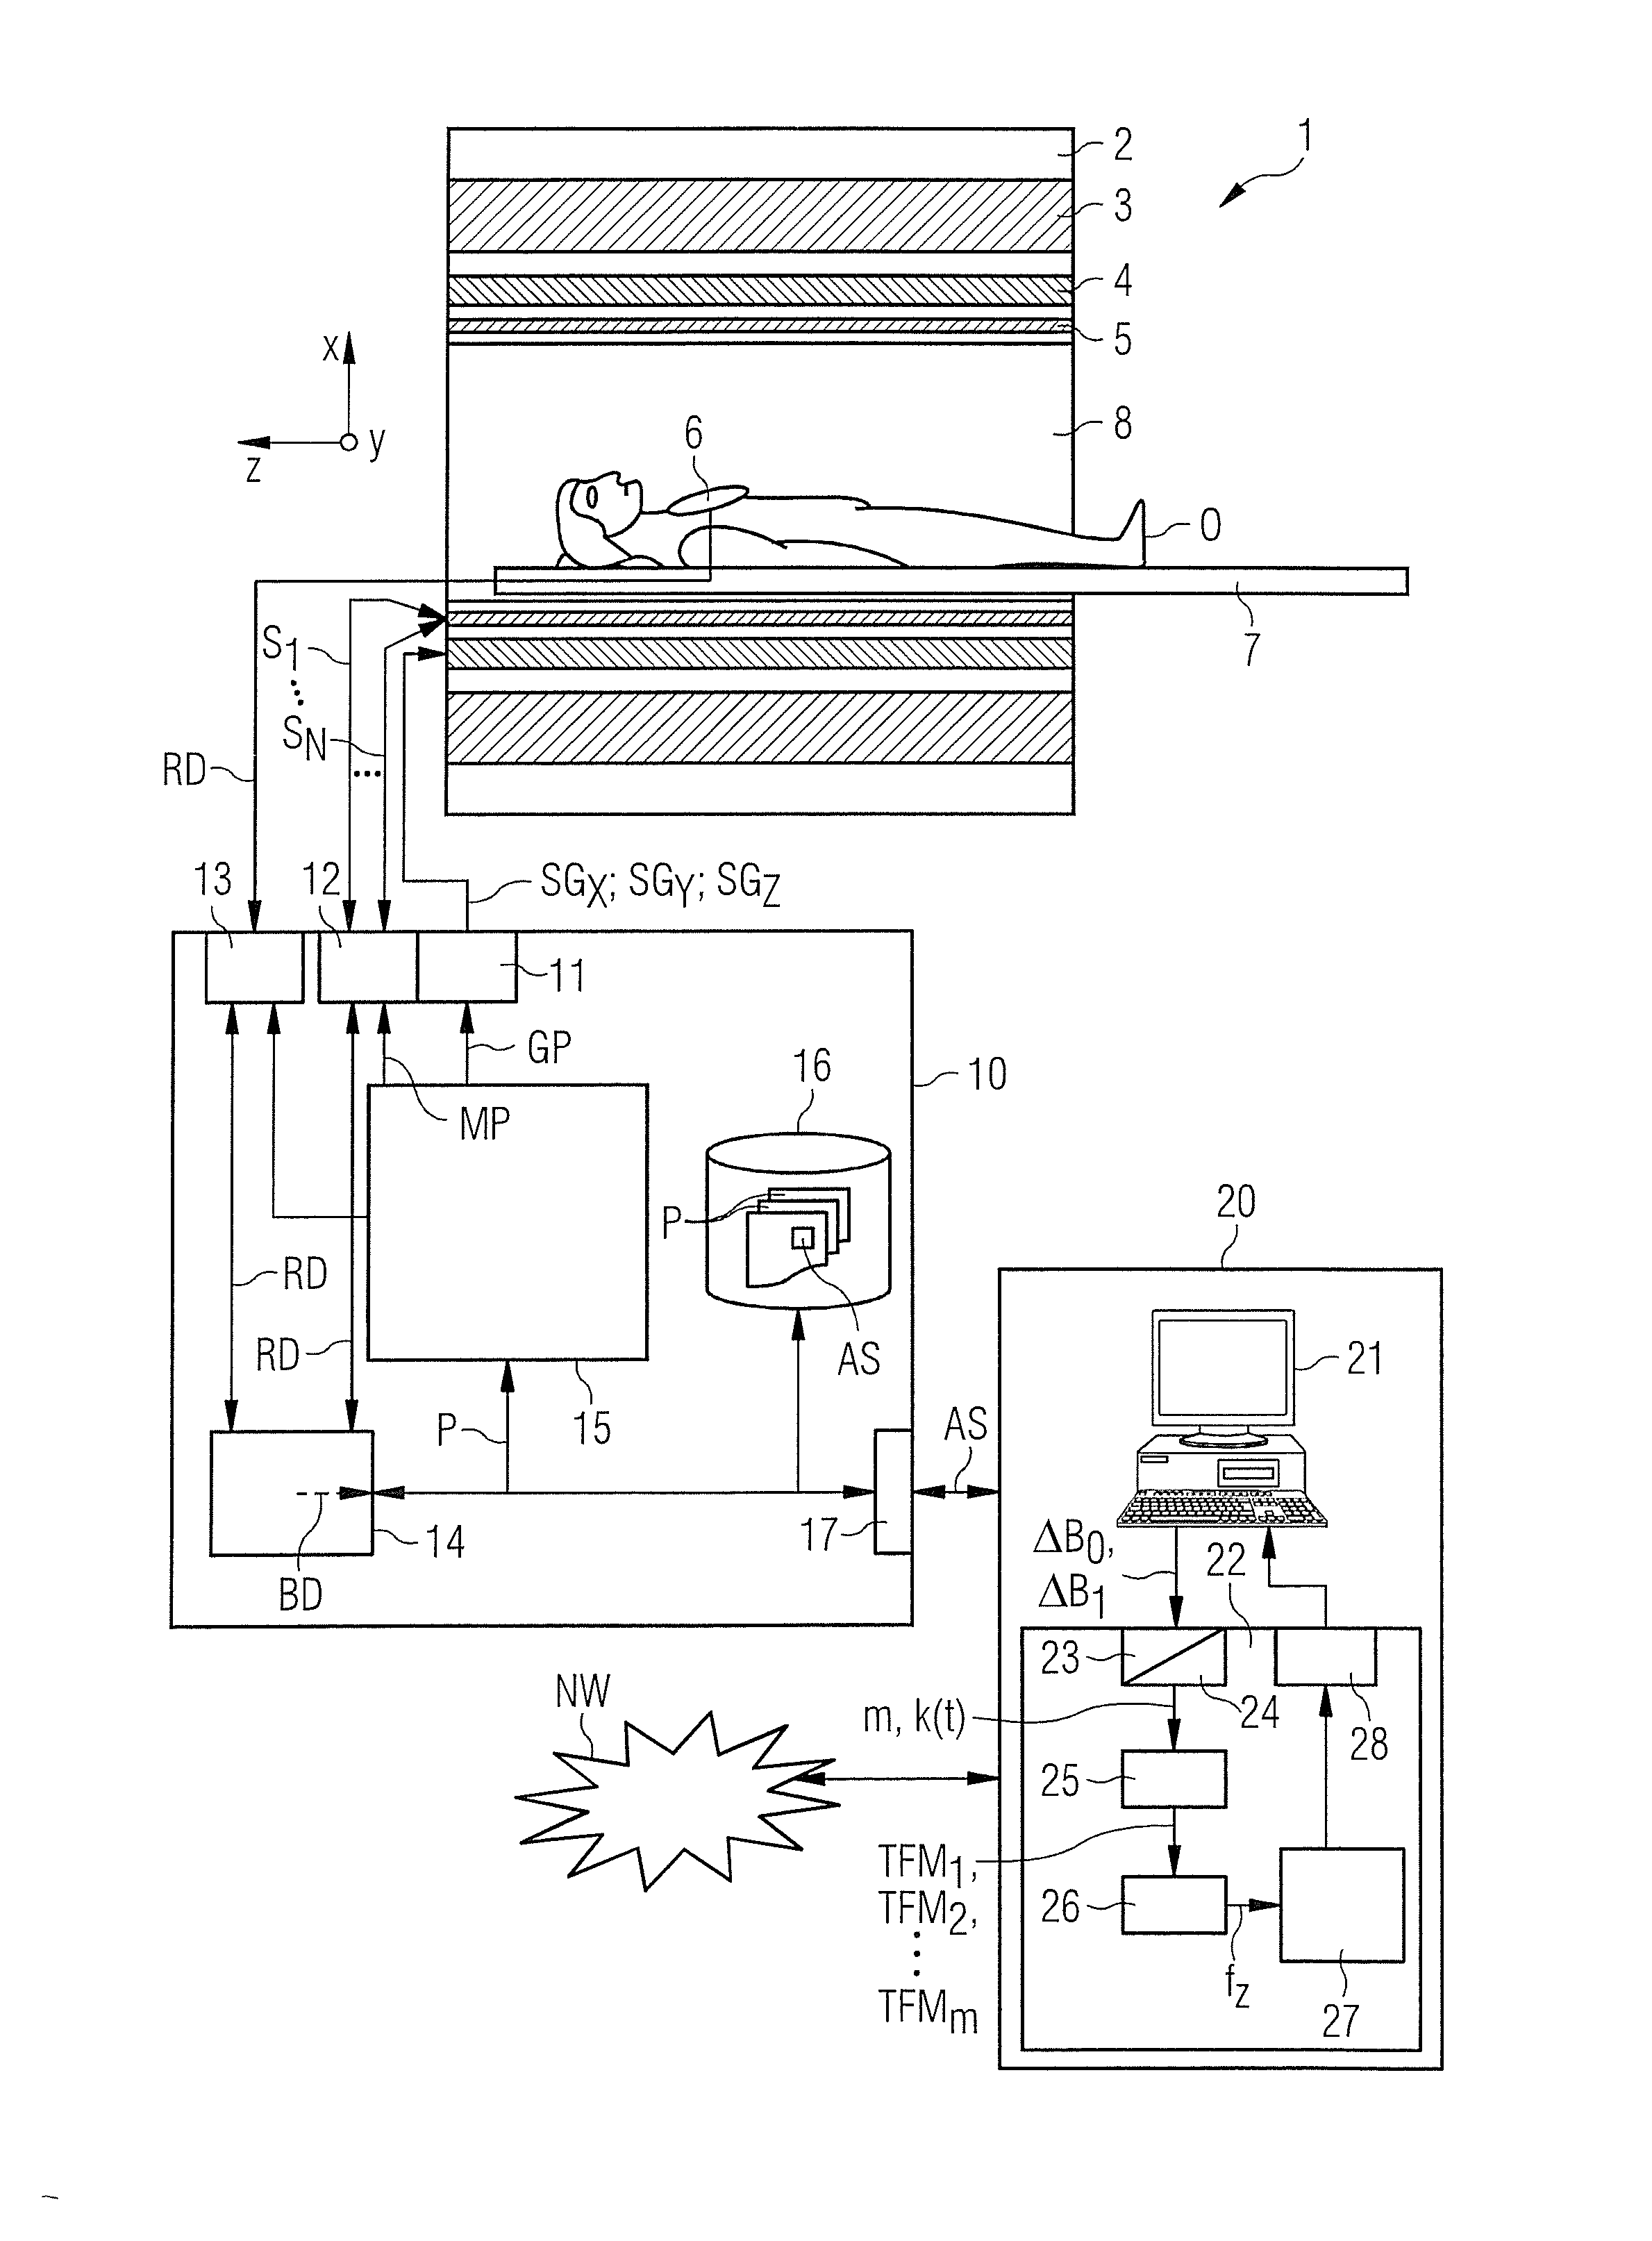 Method and apparatus for determination of a magnetic resonance system control sequence